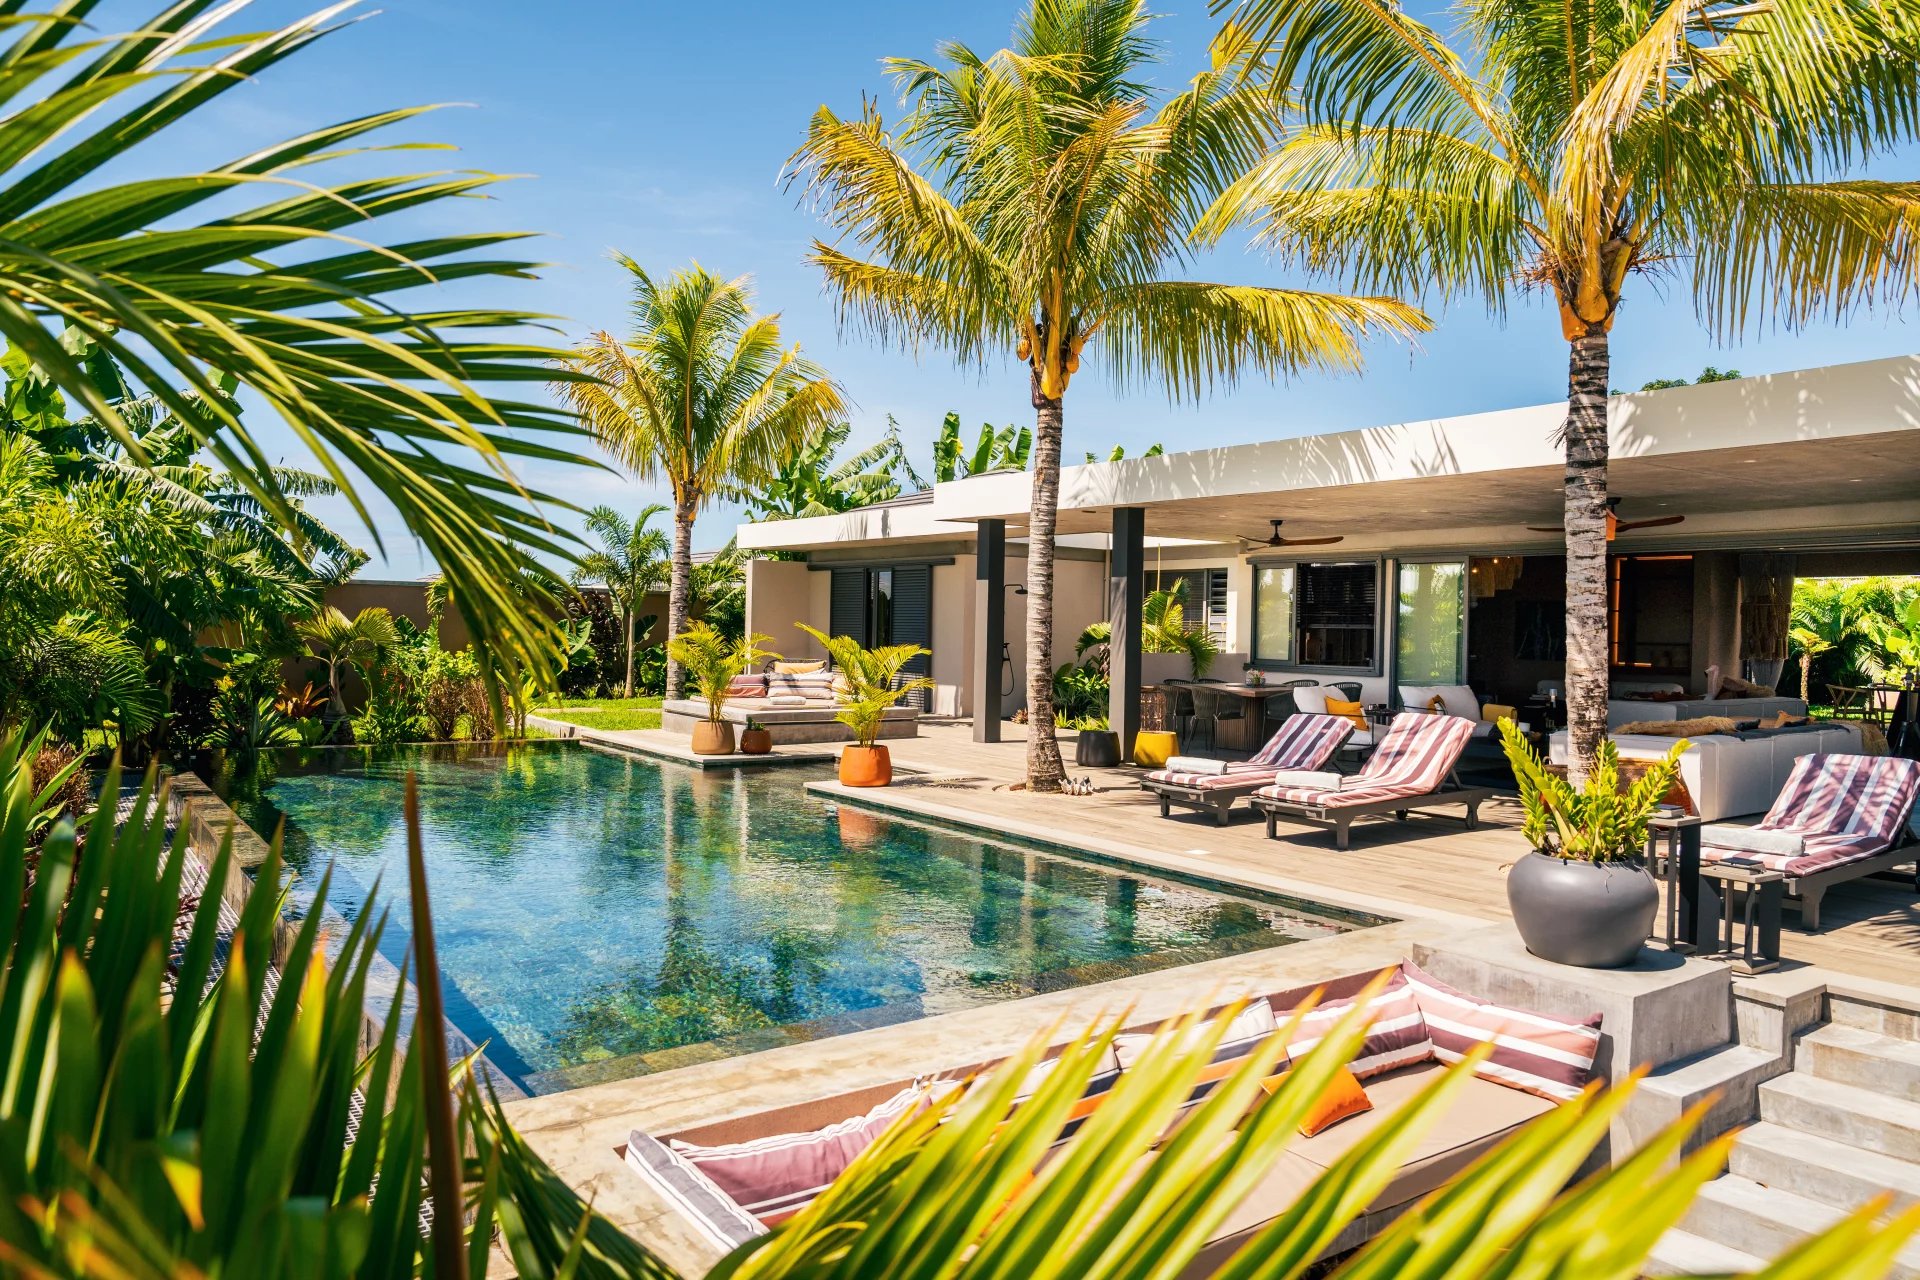 Grand Baie - Mauritius - House, 5 rooms, 3 bedrooms - Slideshow Picture 2